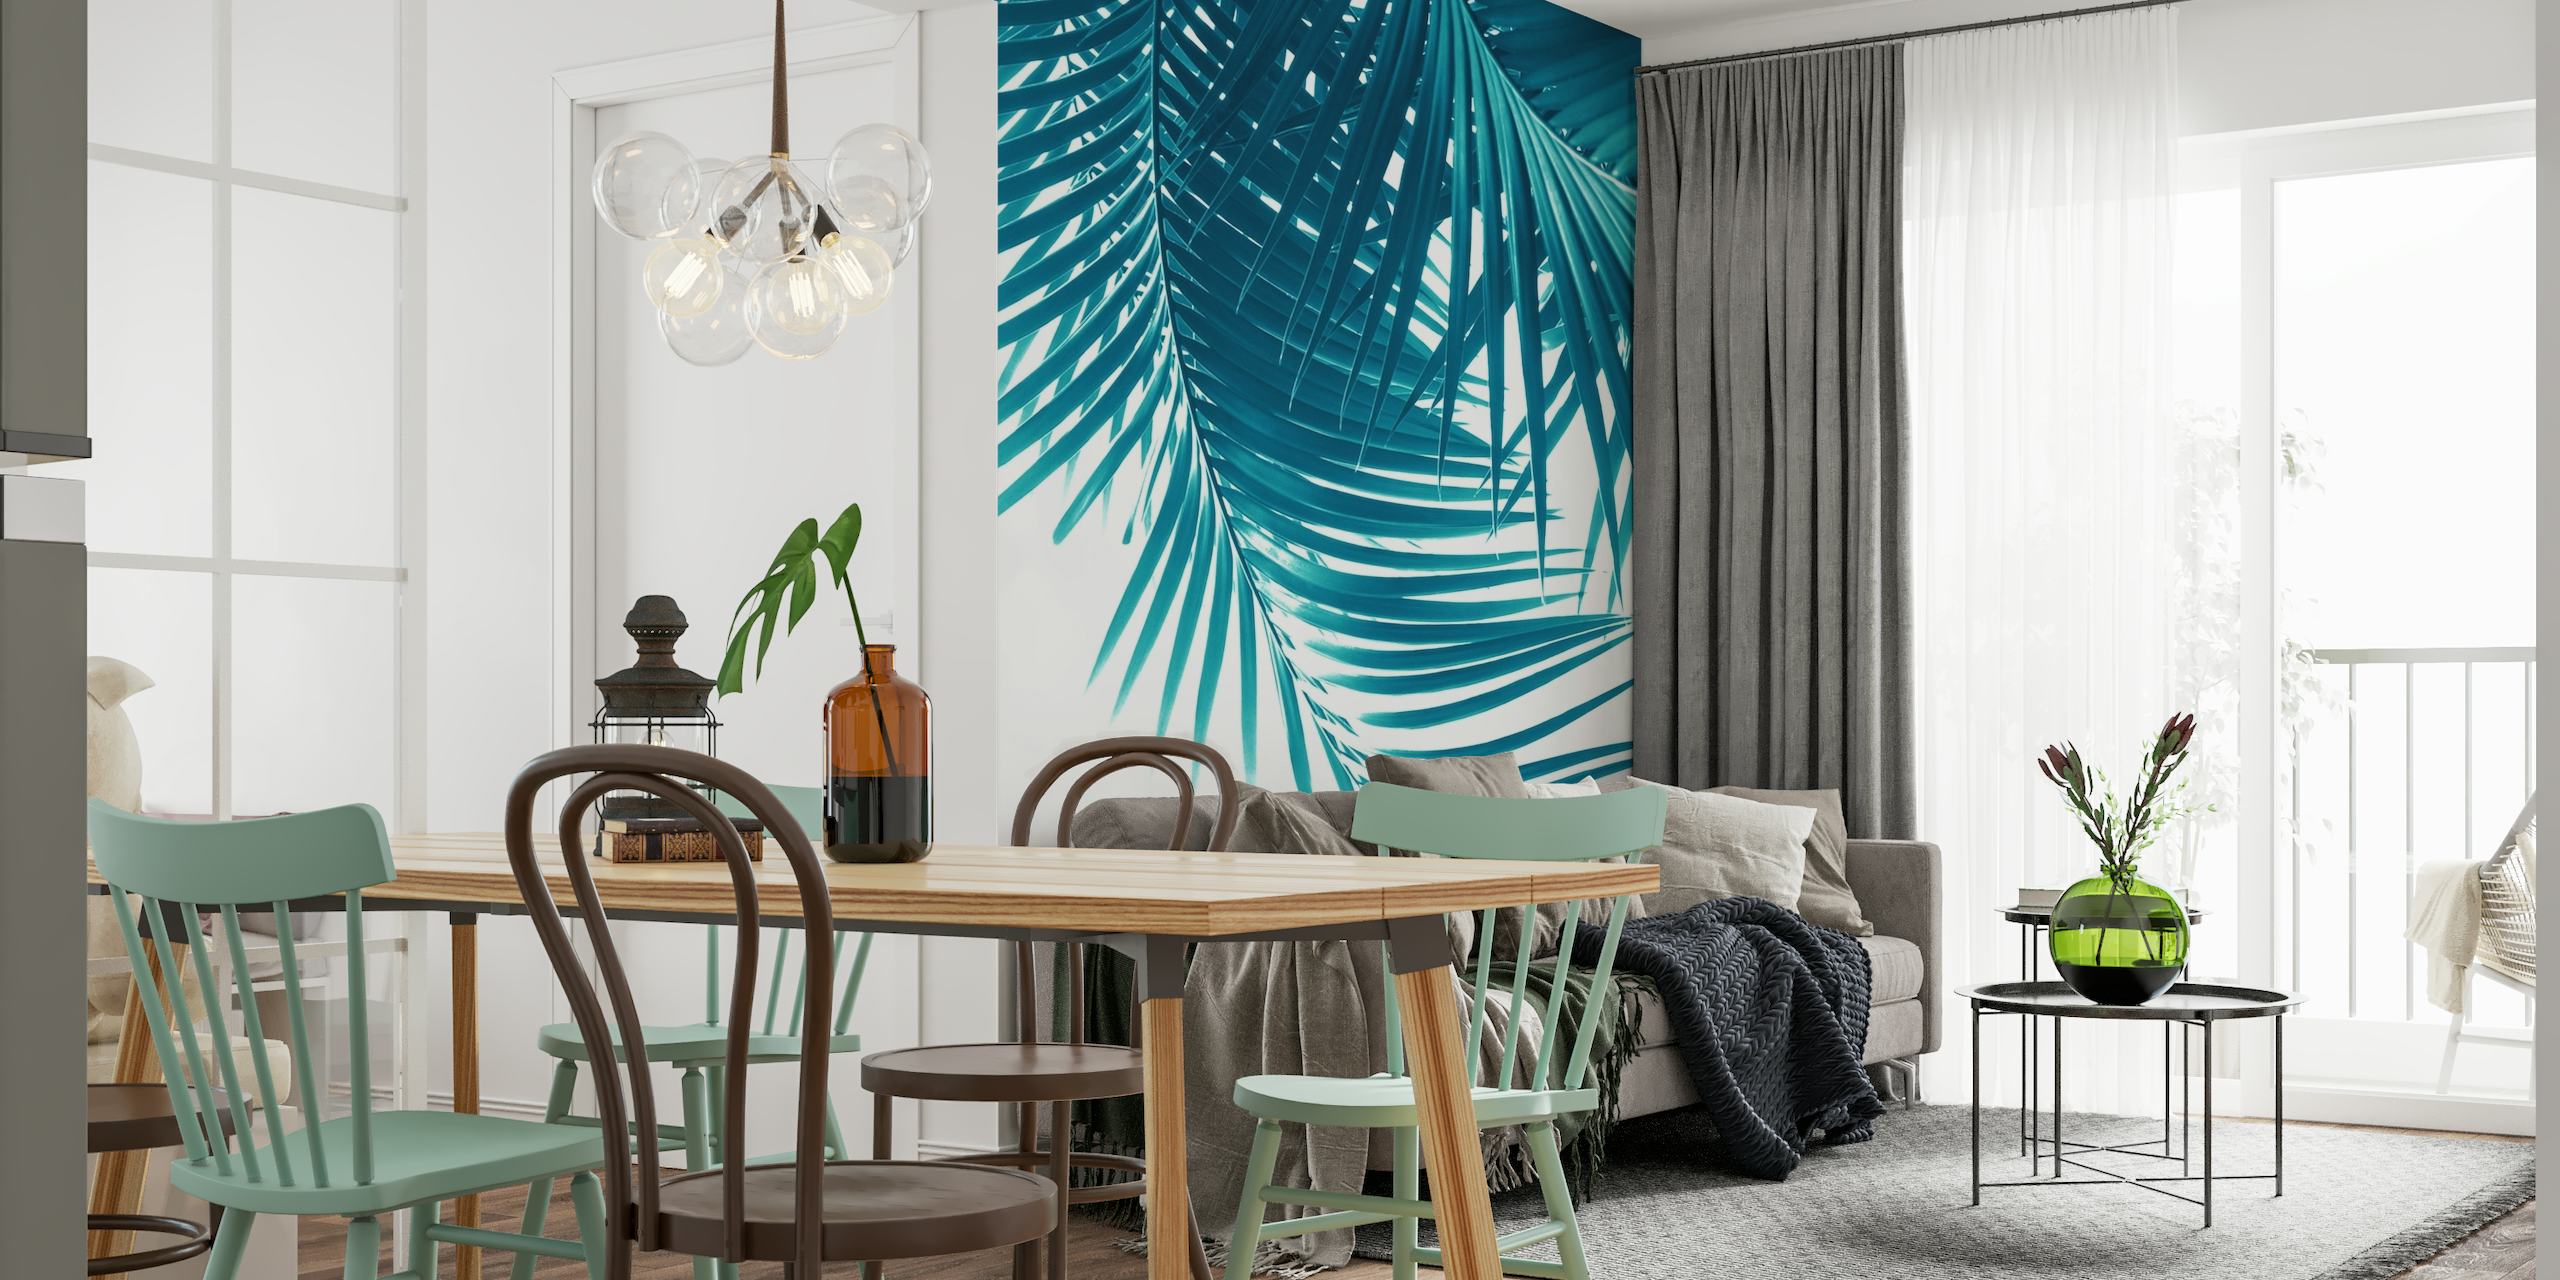 Palm Leaves Teal Blue Vibes 1 behang